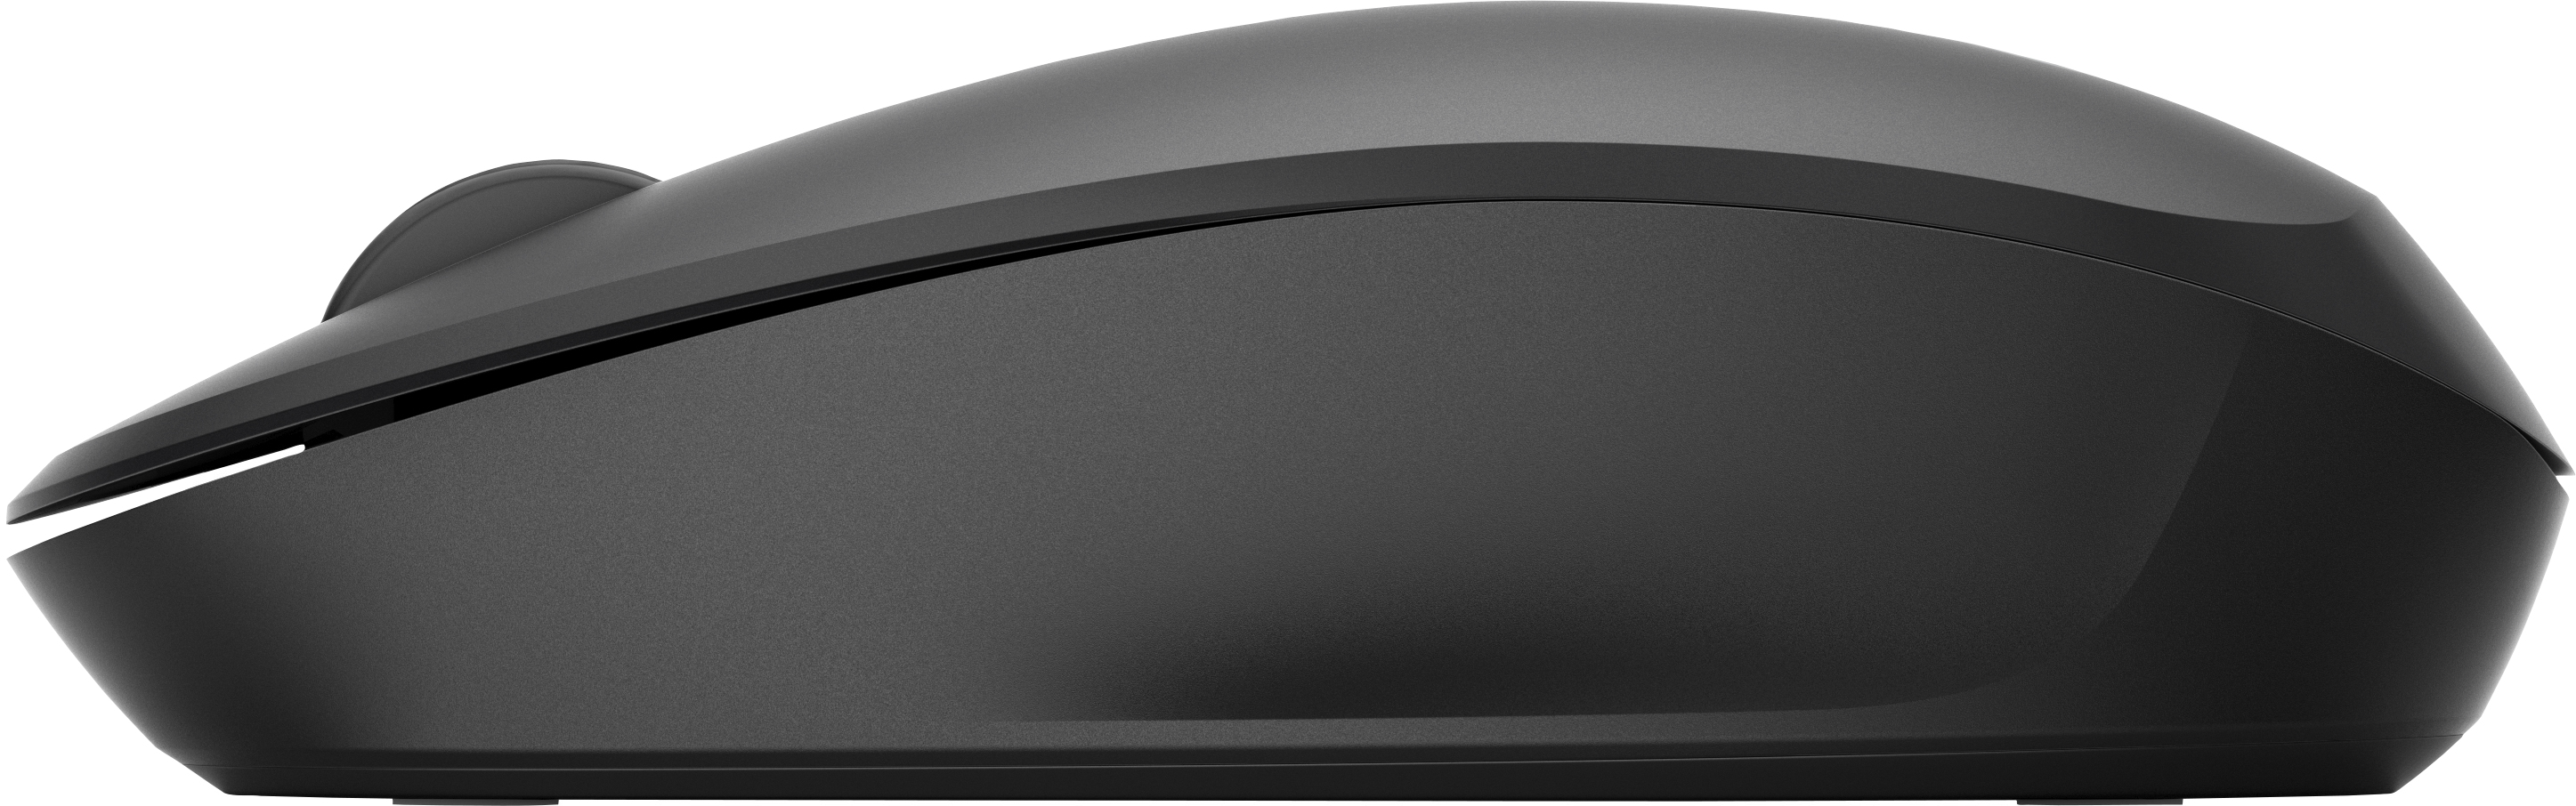 Mouse Inalambrico Bluetooth Hp Laser Negro 6Cr73Aa